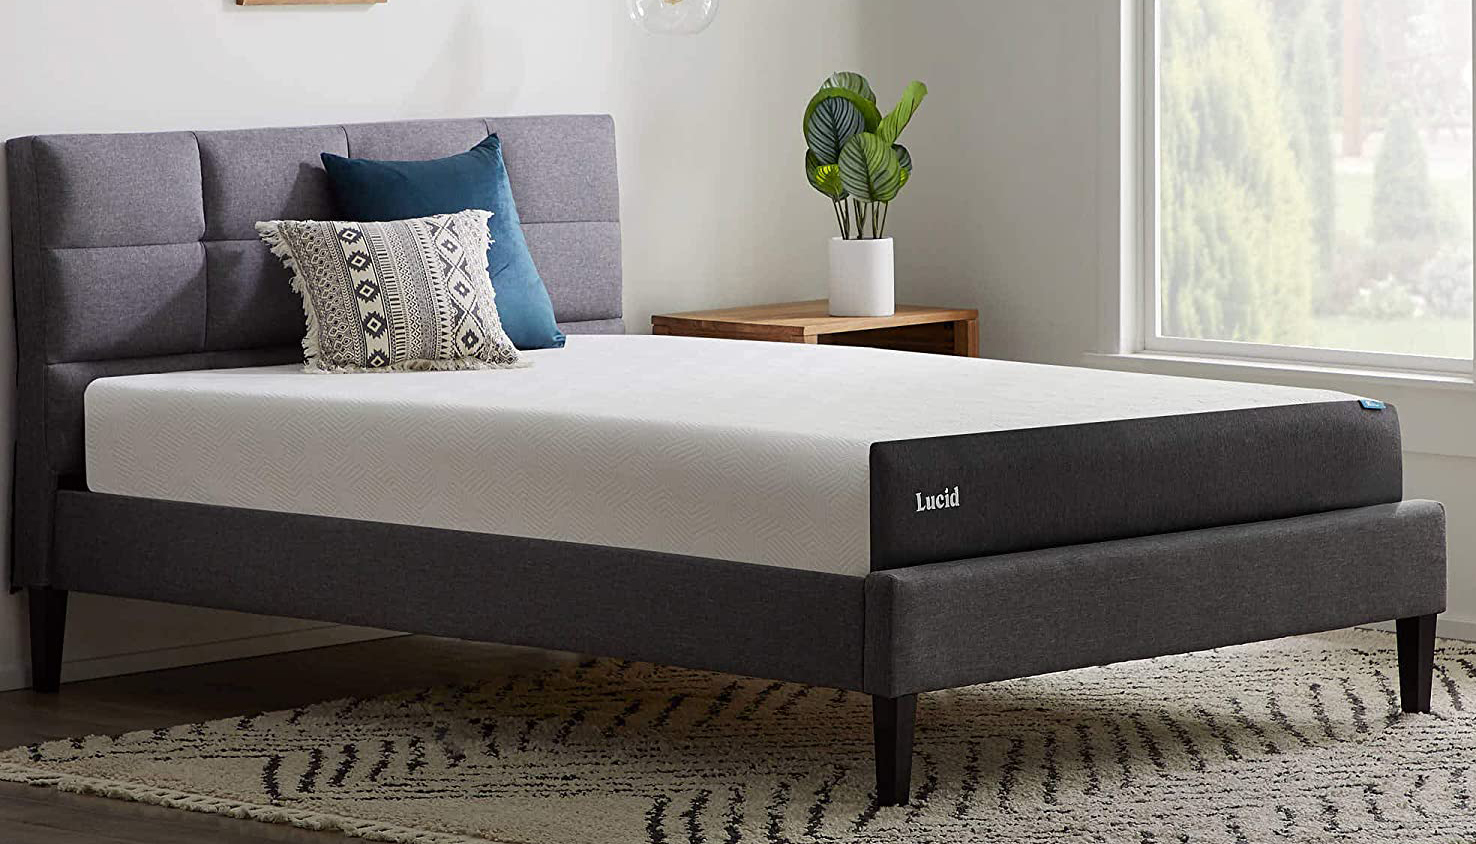 Lucid full-size mattress on a bed frame with a padded headboard, near a window